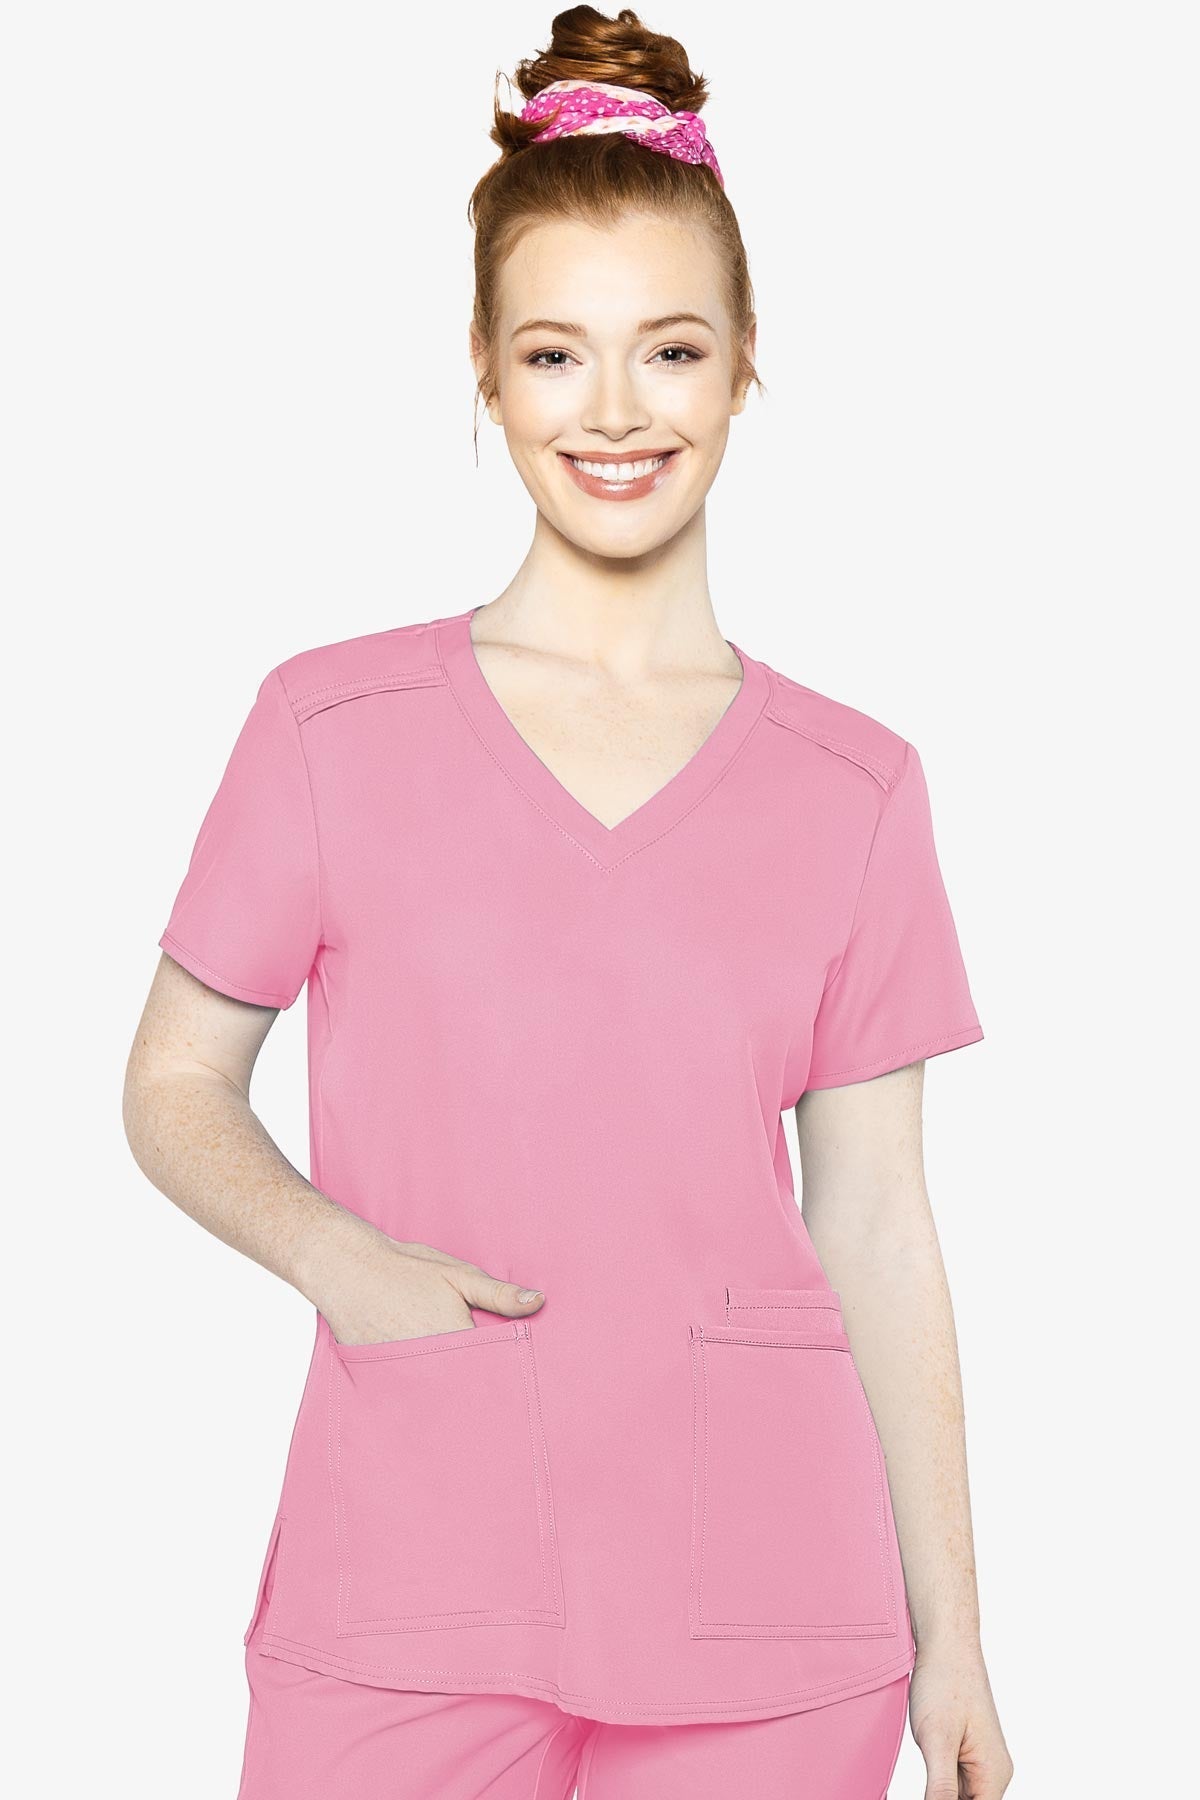 Med Couture 2411 Insight 3 Pocket Top - Taffy Pink